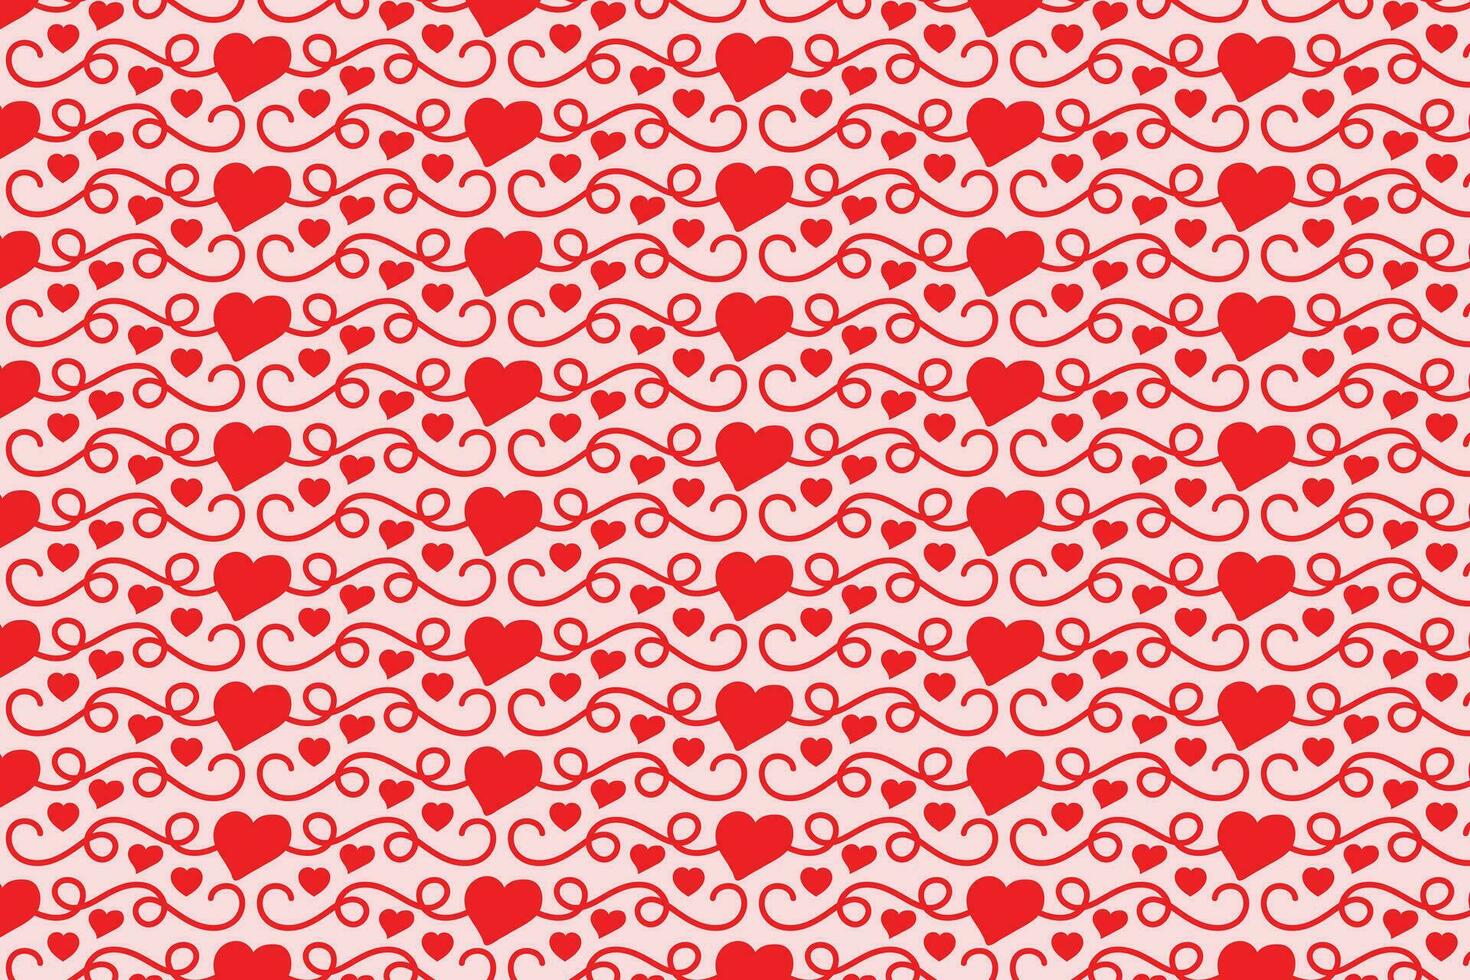 Flourishes Swirling hearts seamless pattern, abstract hearts Swirls pattern, valentines day Elegant seamless background, curly hearts repeating background, Red love romantic texture wrapping paper vector